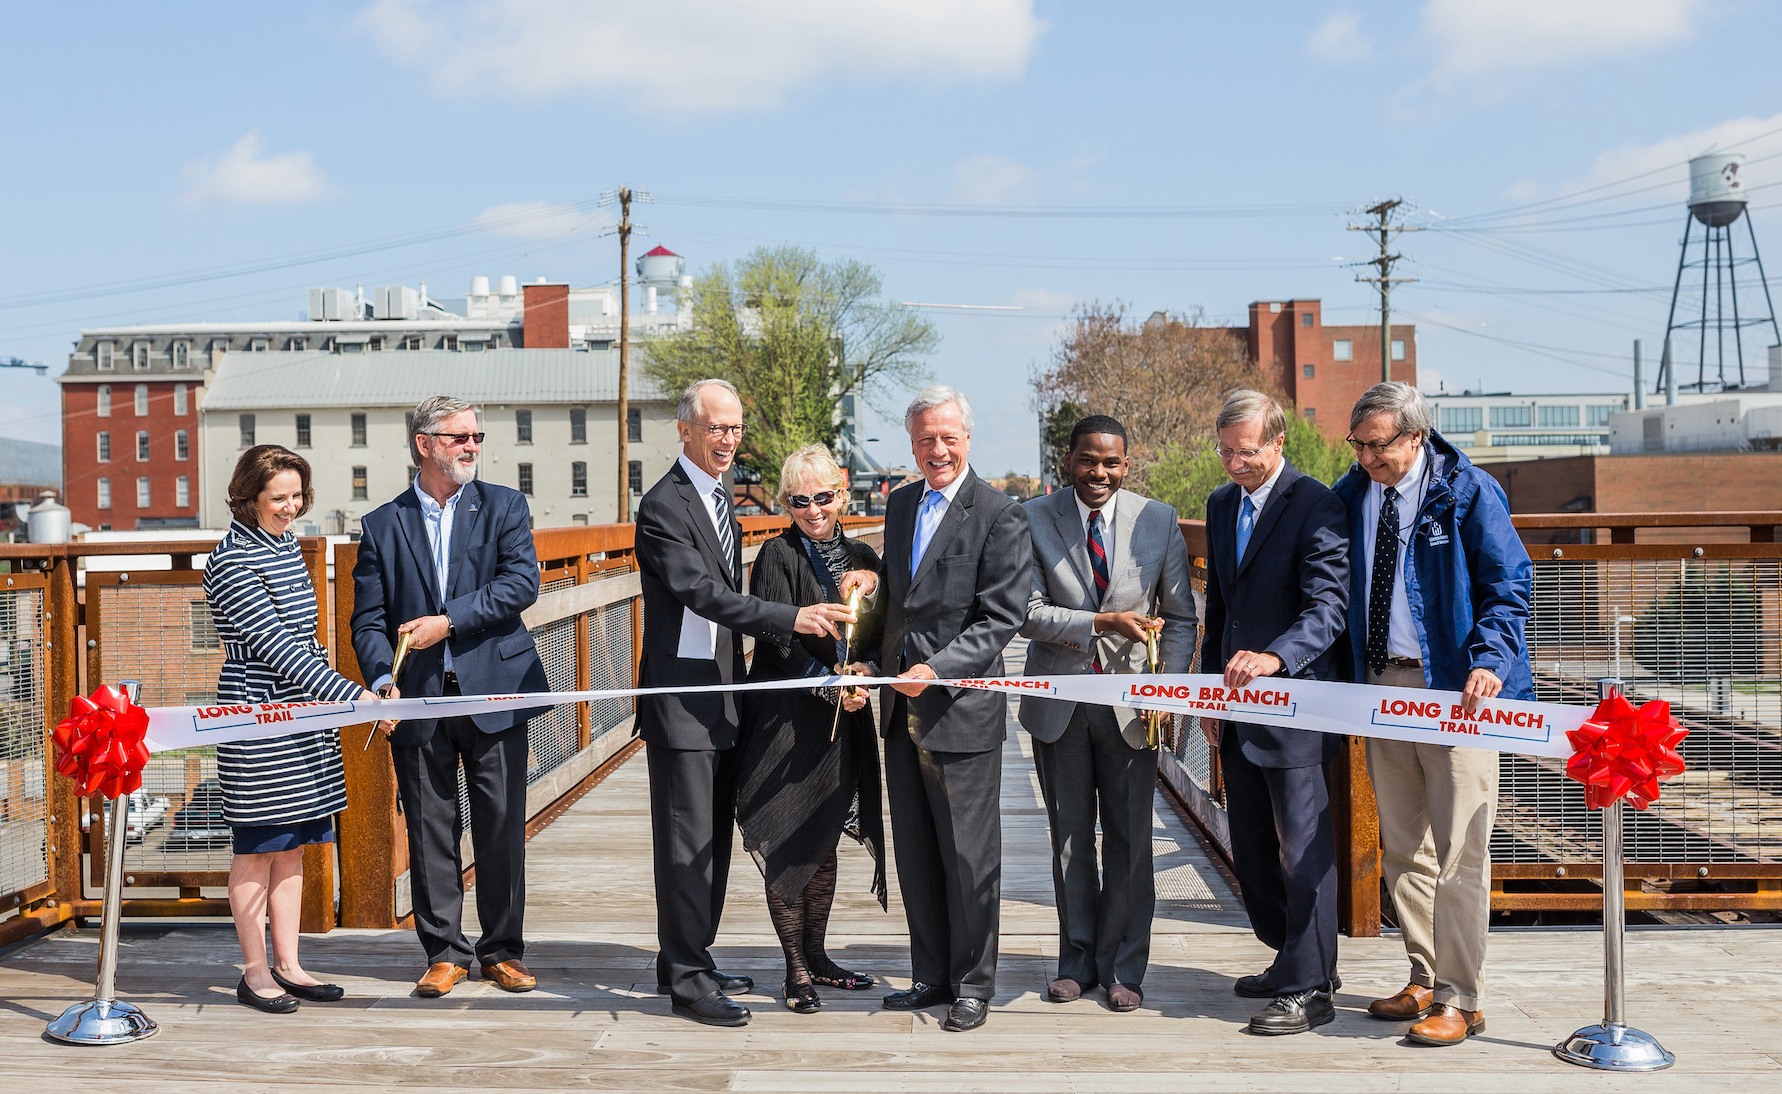 Ribbon cutting ceremony for the Innovation Quarter's Long Branch Trail